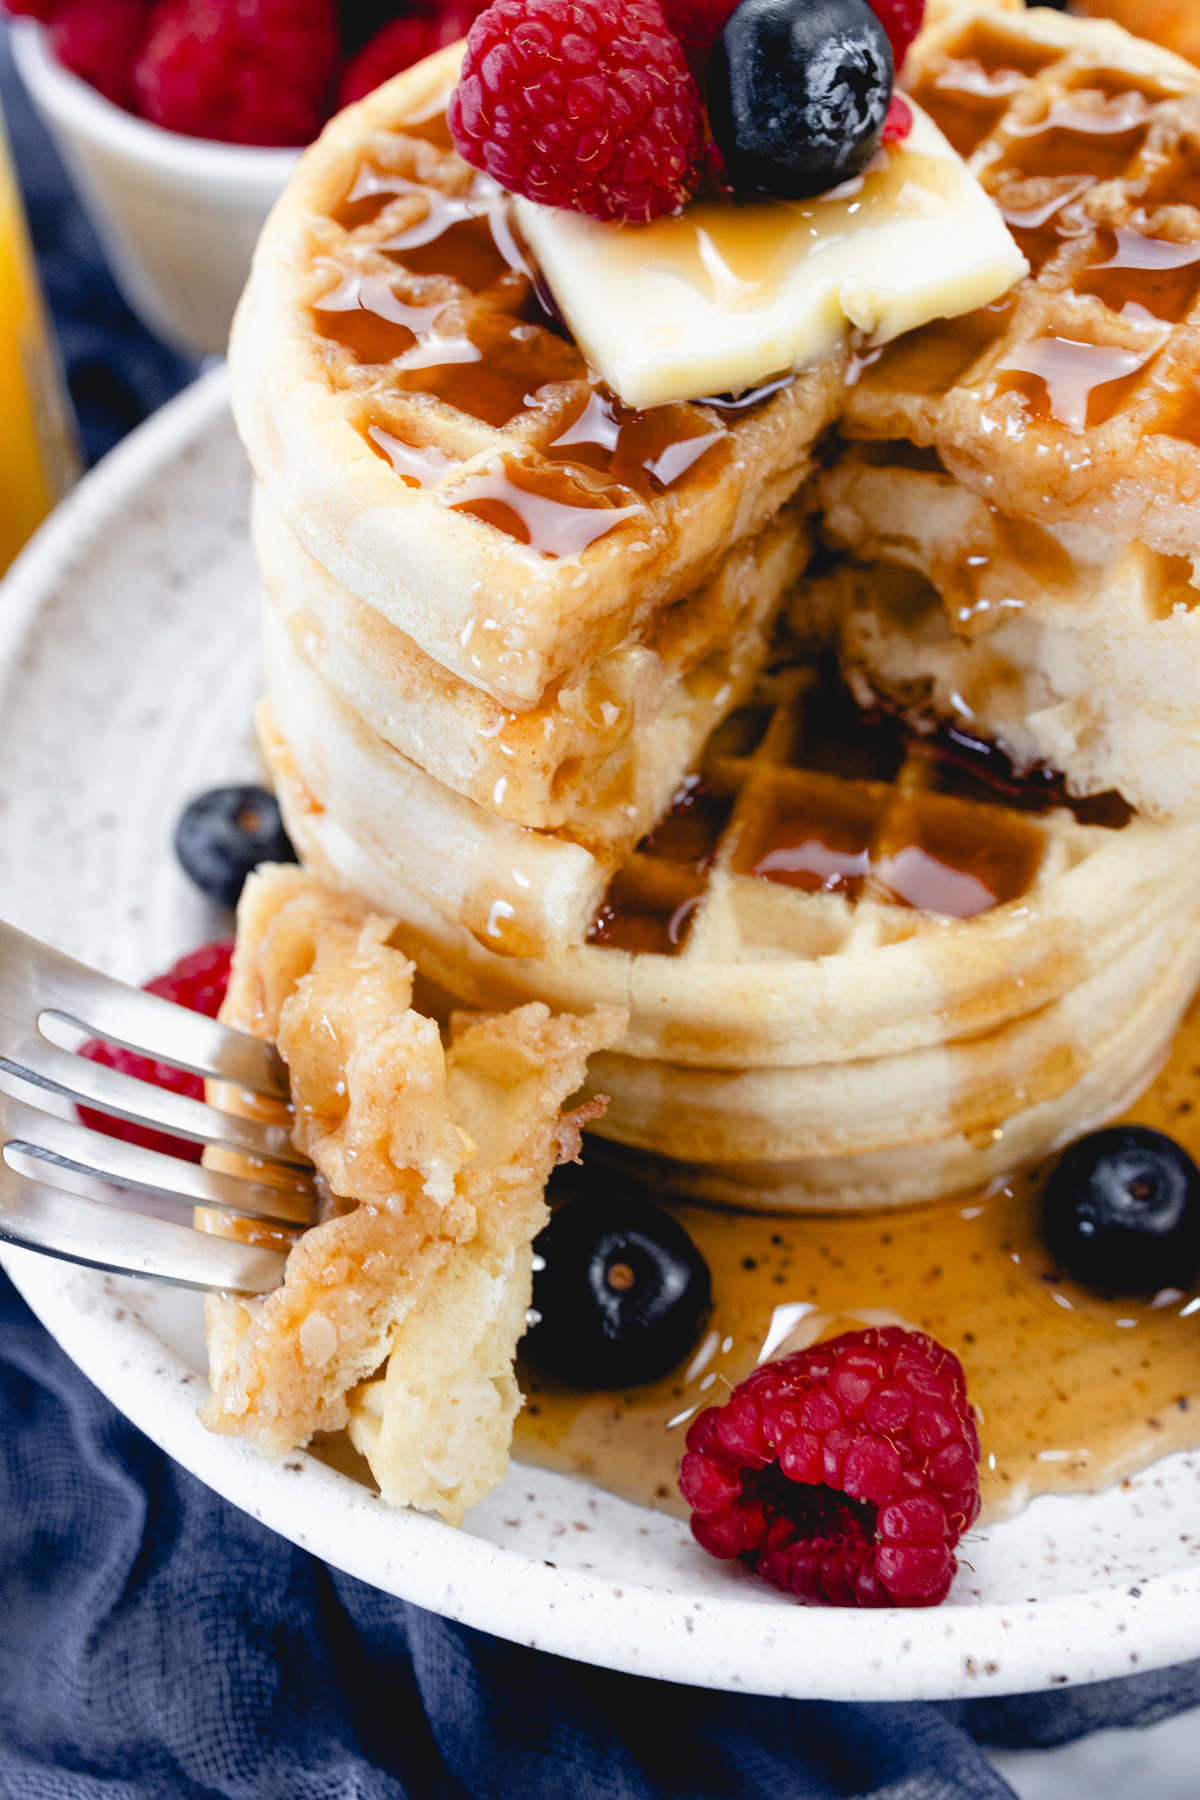 Close up view of a stack of waffles on a plate, topped with syrup, butter, and berries. A fork is in the foreground with skewered pieces of waffle on it. Behind the plate is a bowl of berries, and a glass of orange juice.